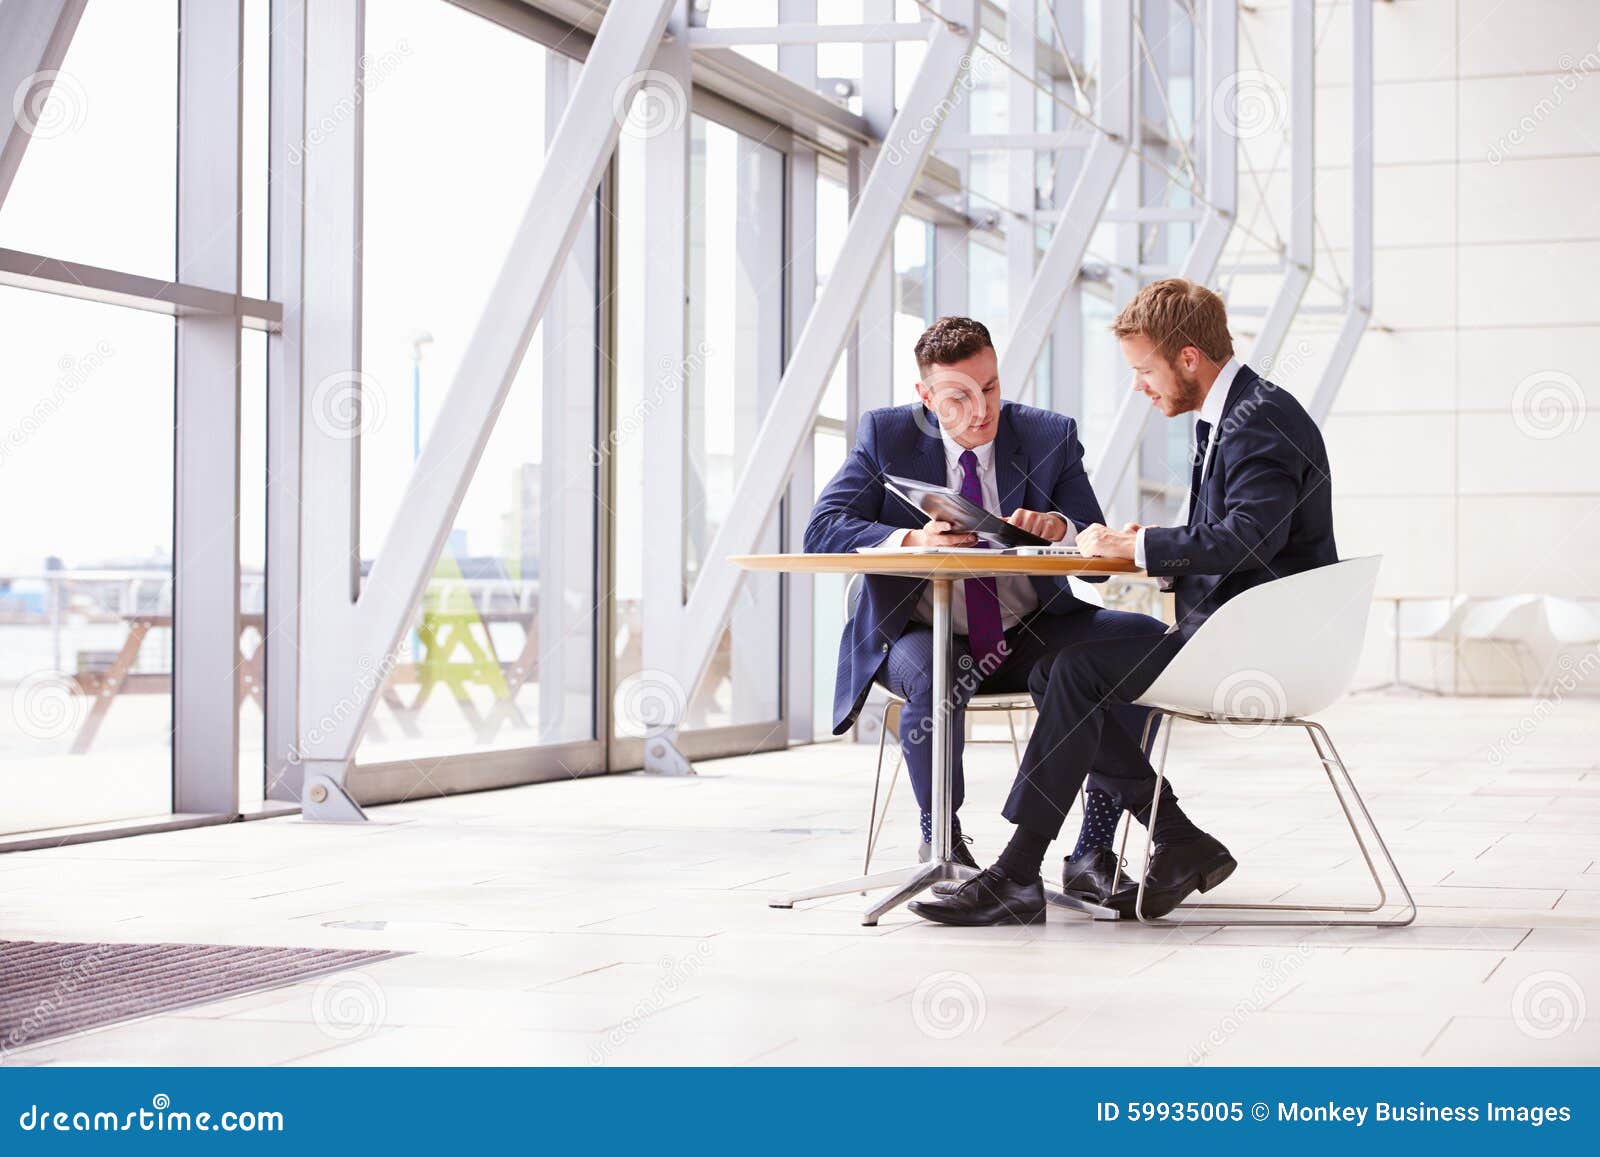 two business colleagues at meeting in modern office interior